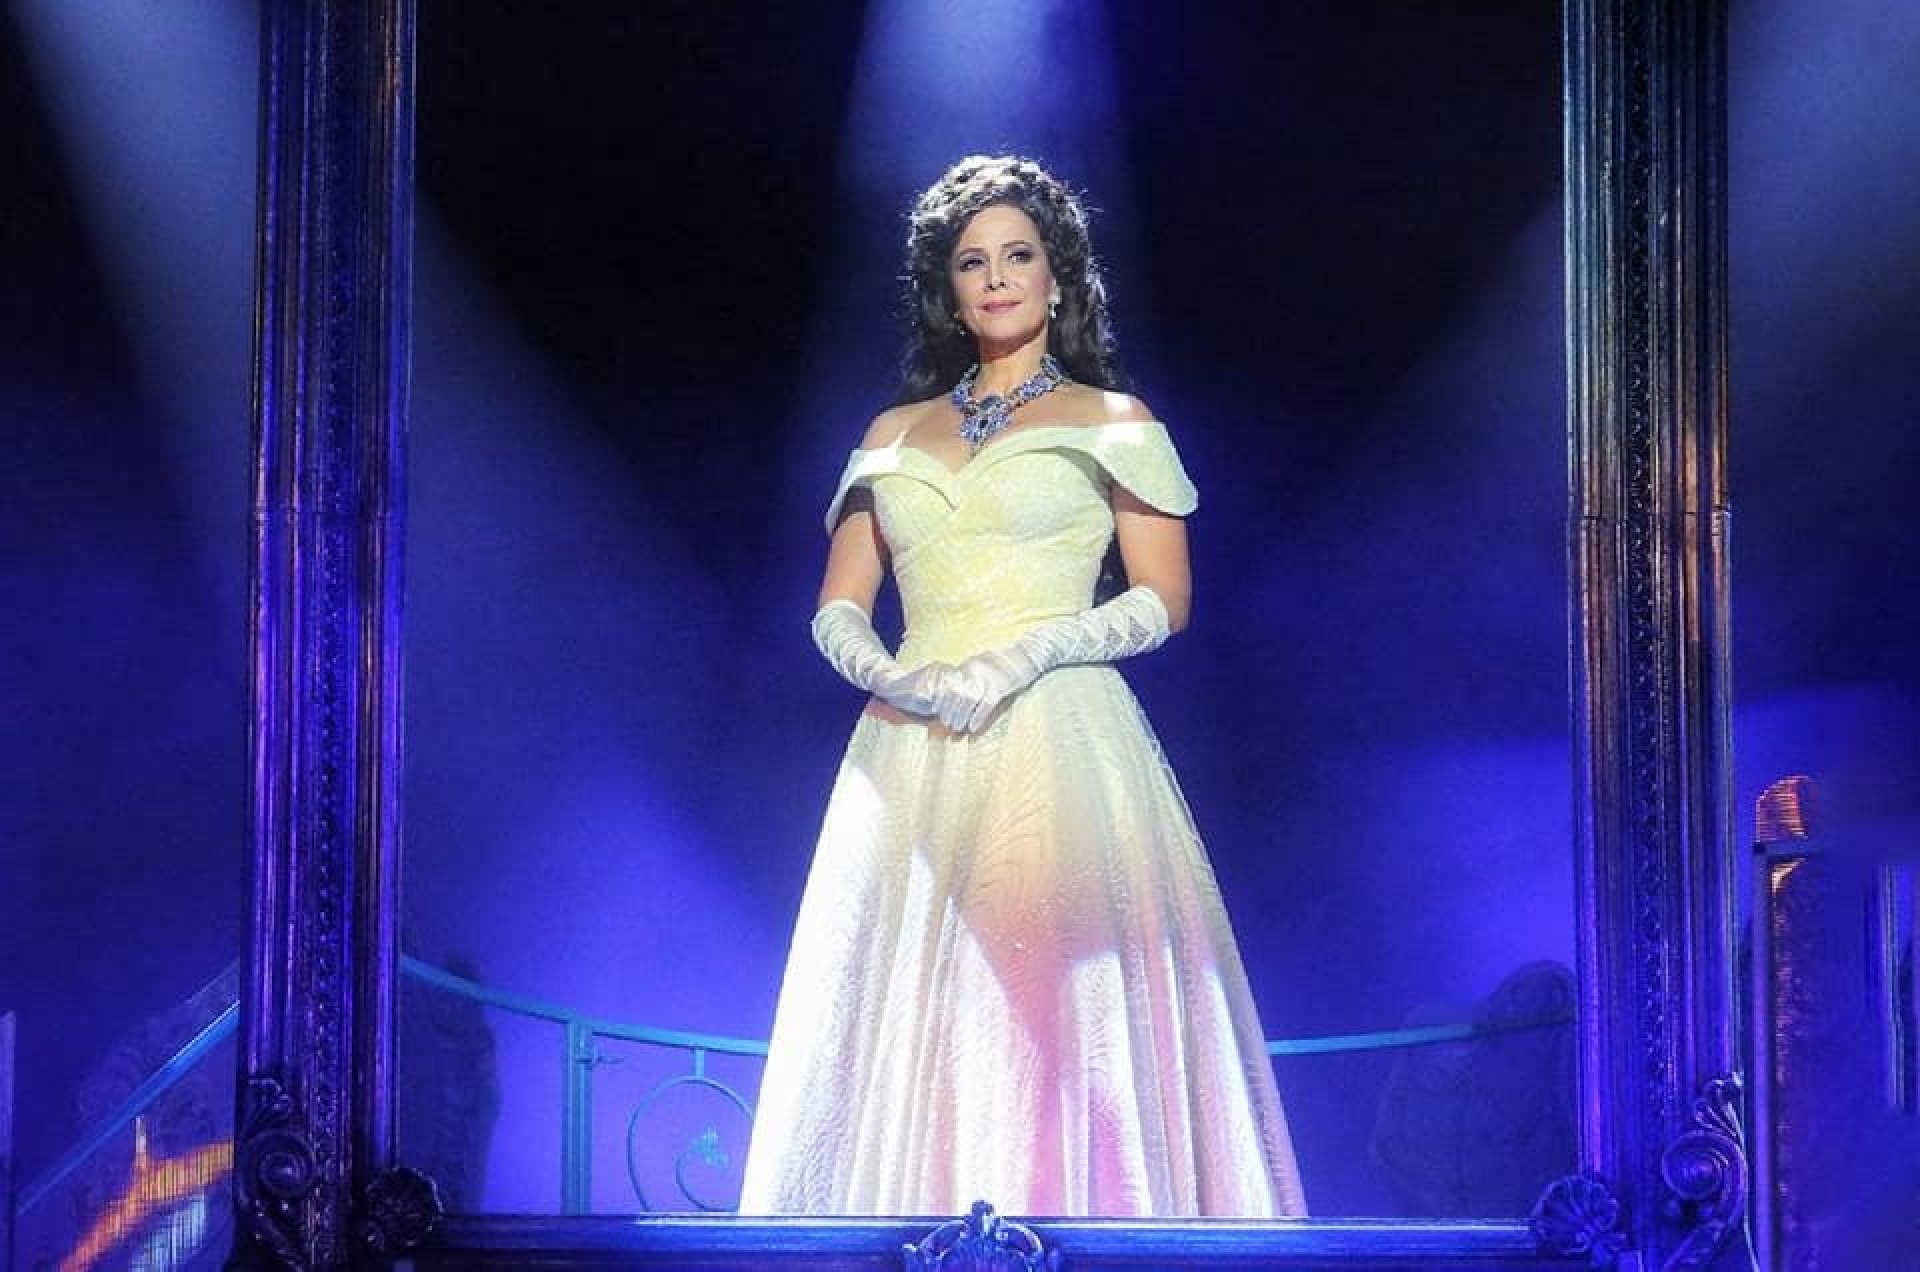 Elisabeth, the musical by Michael Kunze and Sylvester Levay